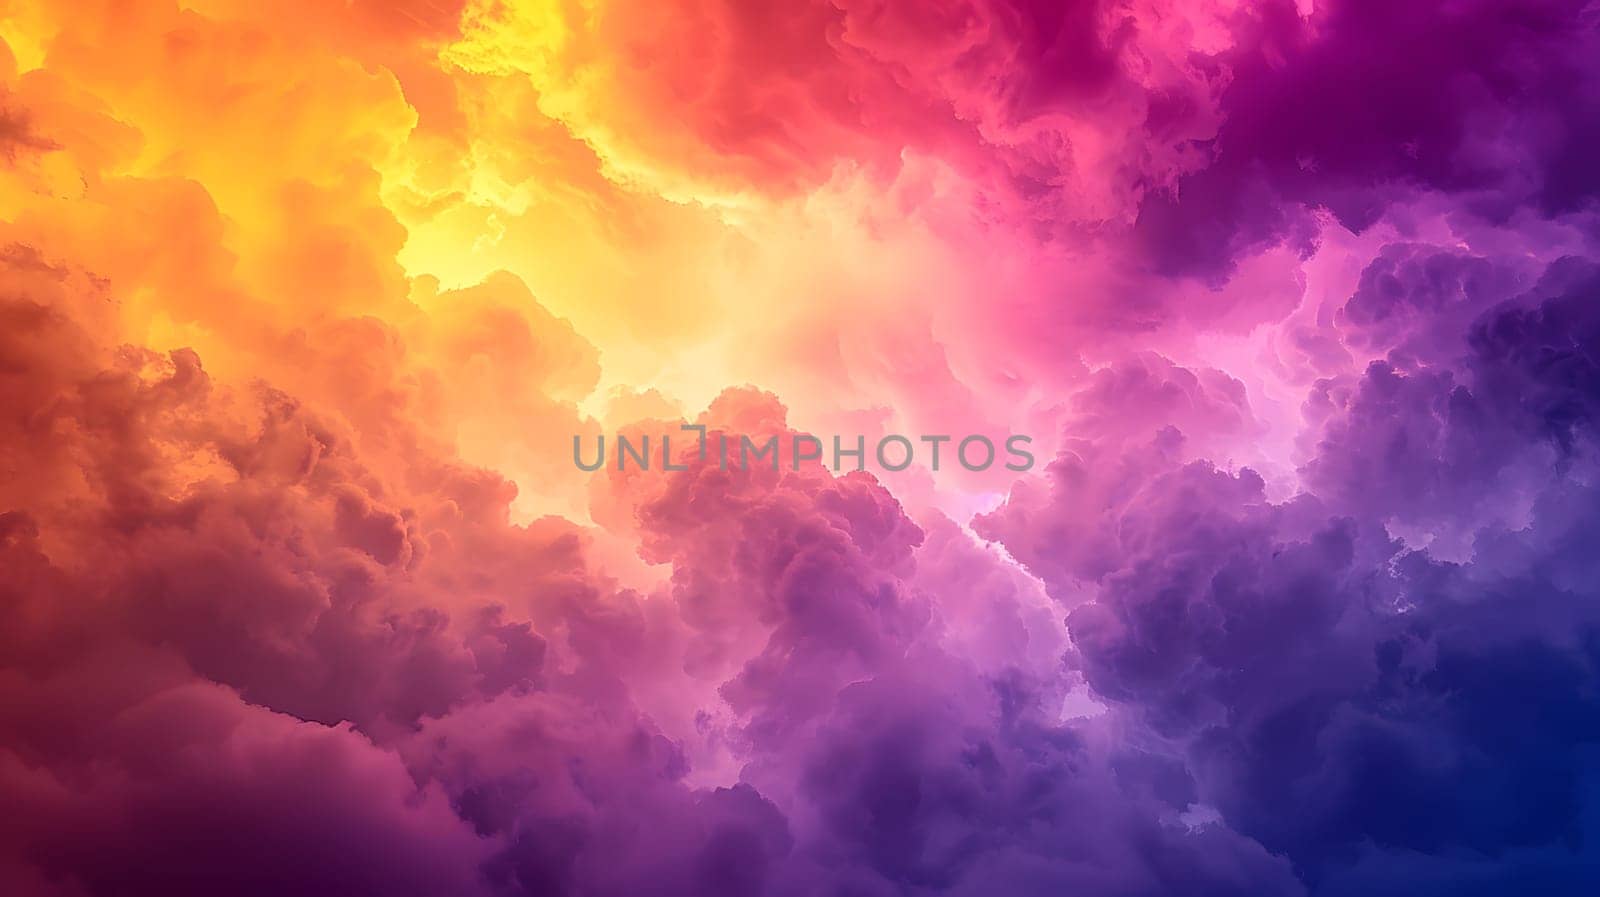 A vibrant cumulus cloud filled sky at dusk displaying a rainbow of colors, including purple hues, creating a surreal atmospheric phenomenon